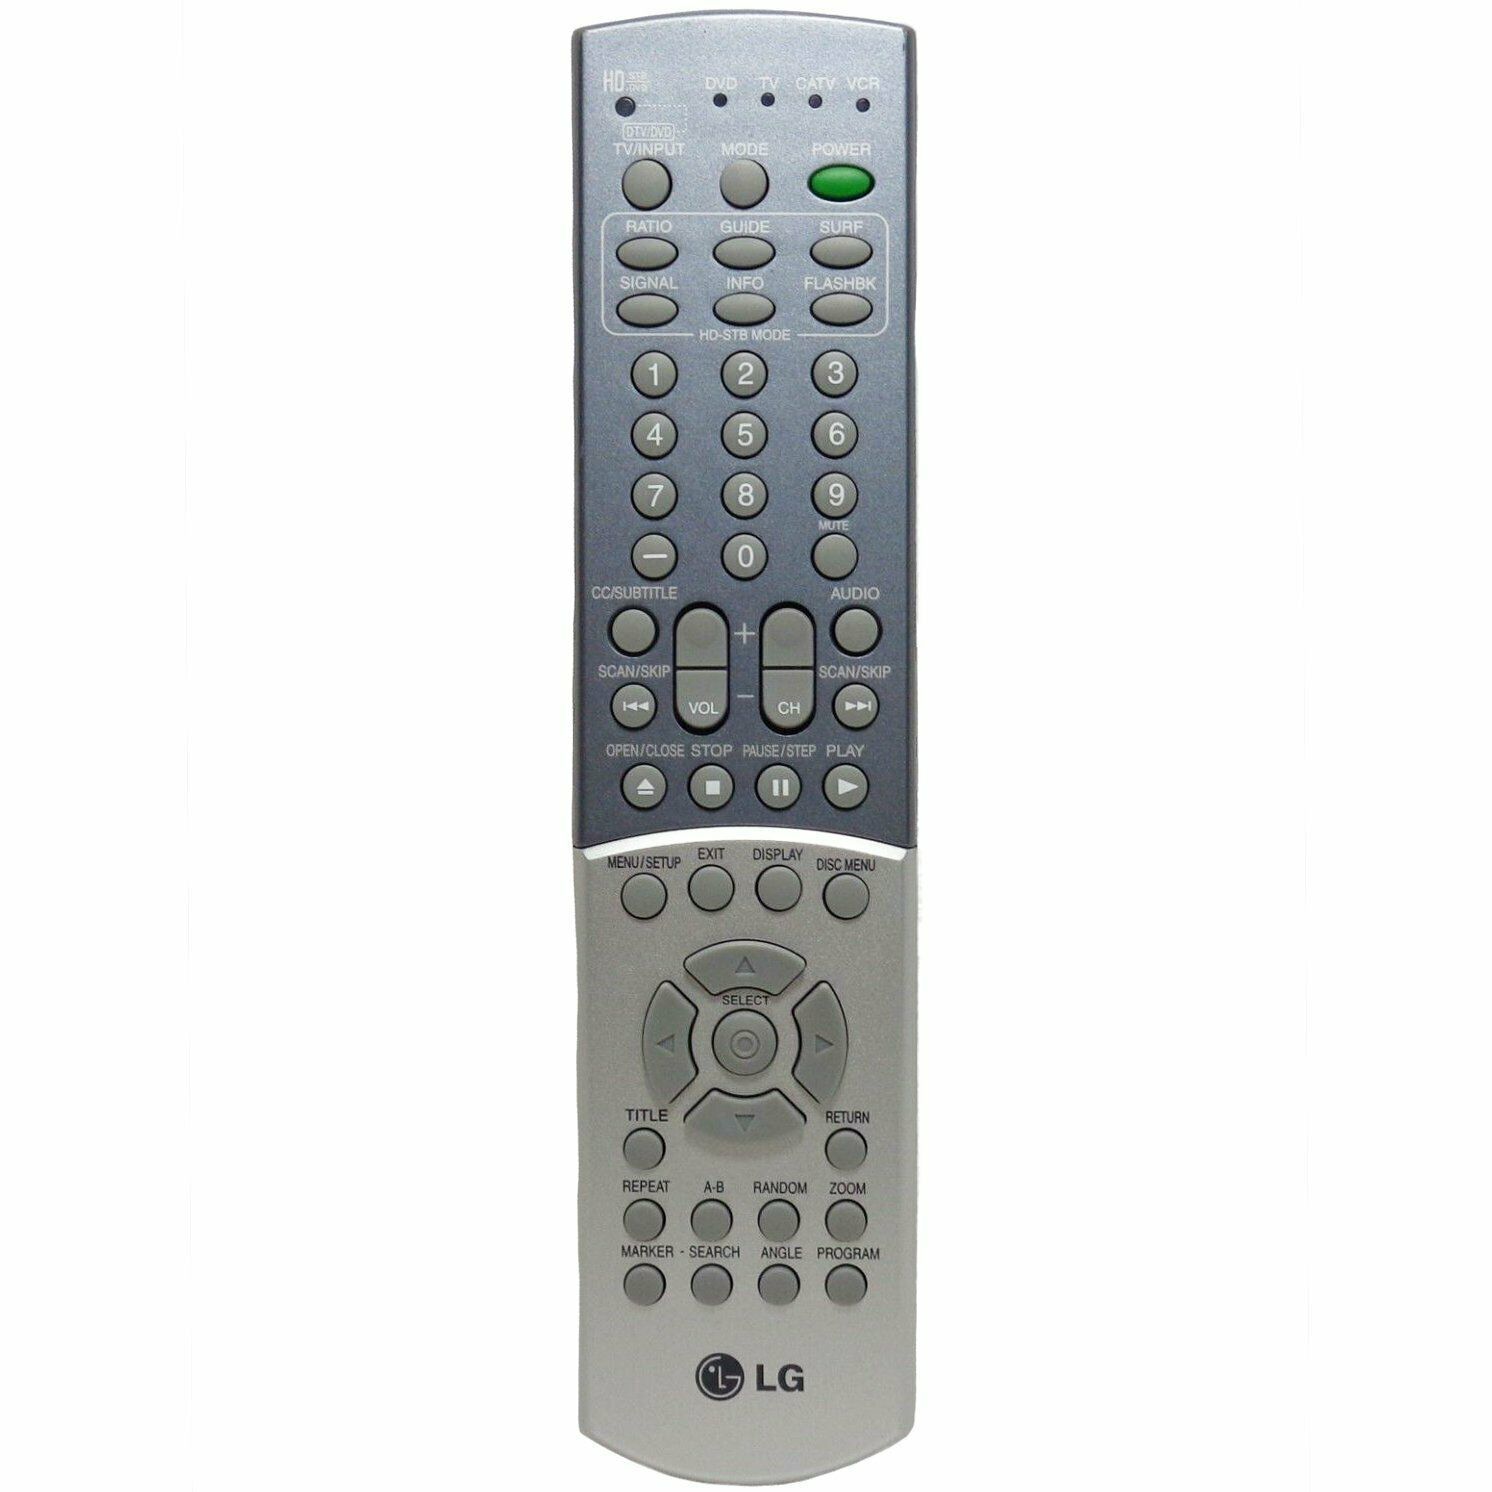 LG 6711R1N132B Factory Original HD Receiver / DVD Player Remote For LG LST-3510A - $17.39